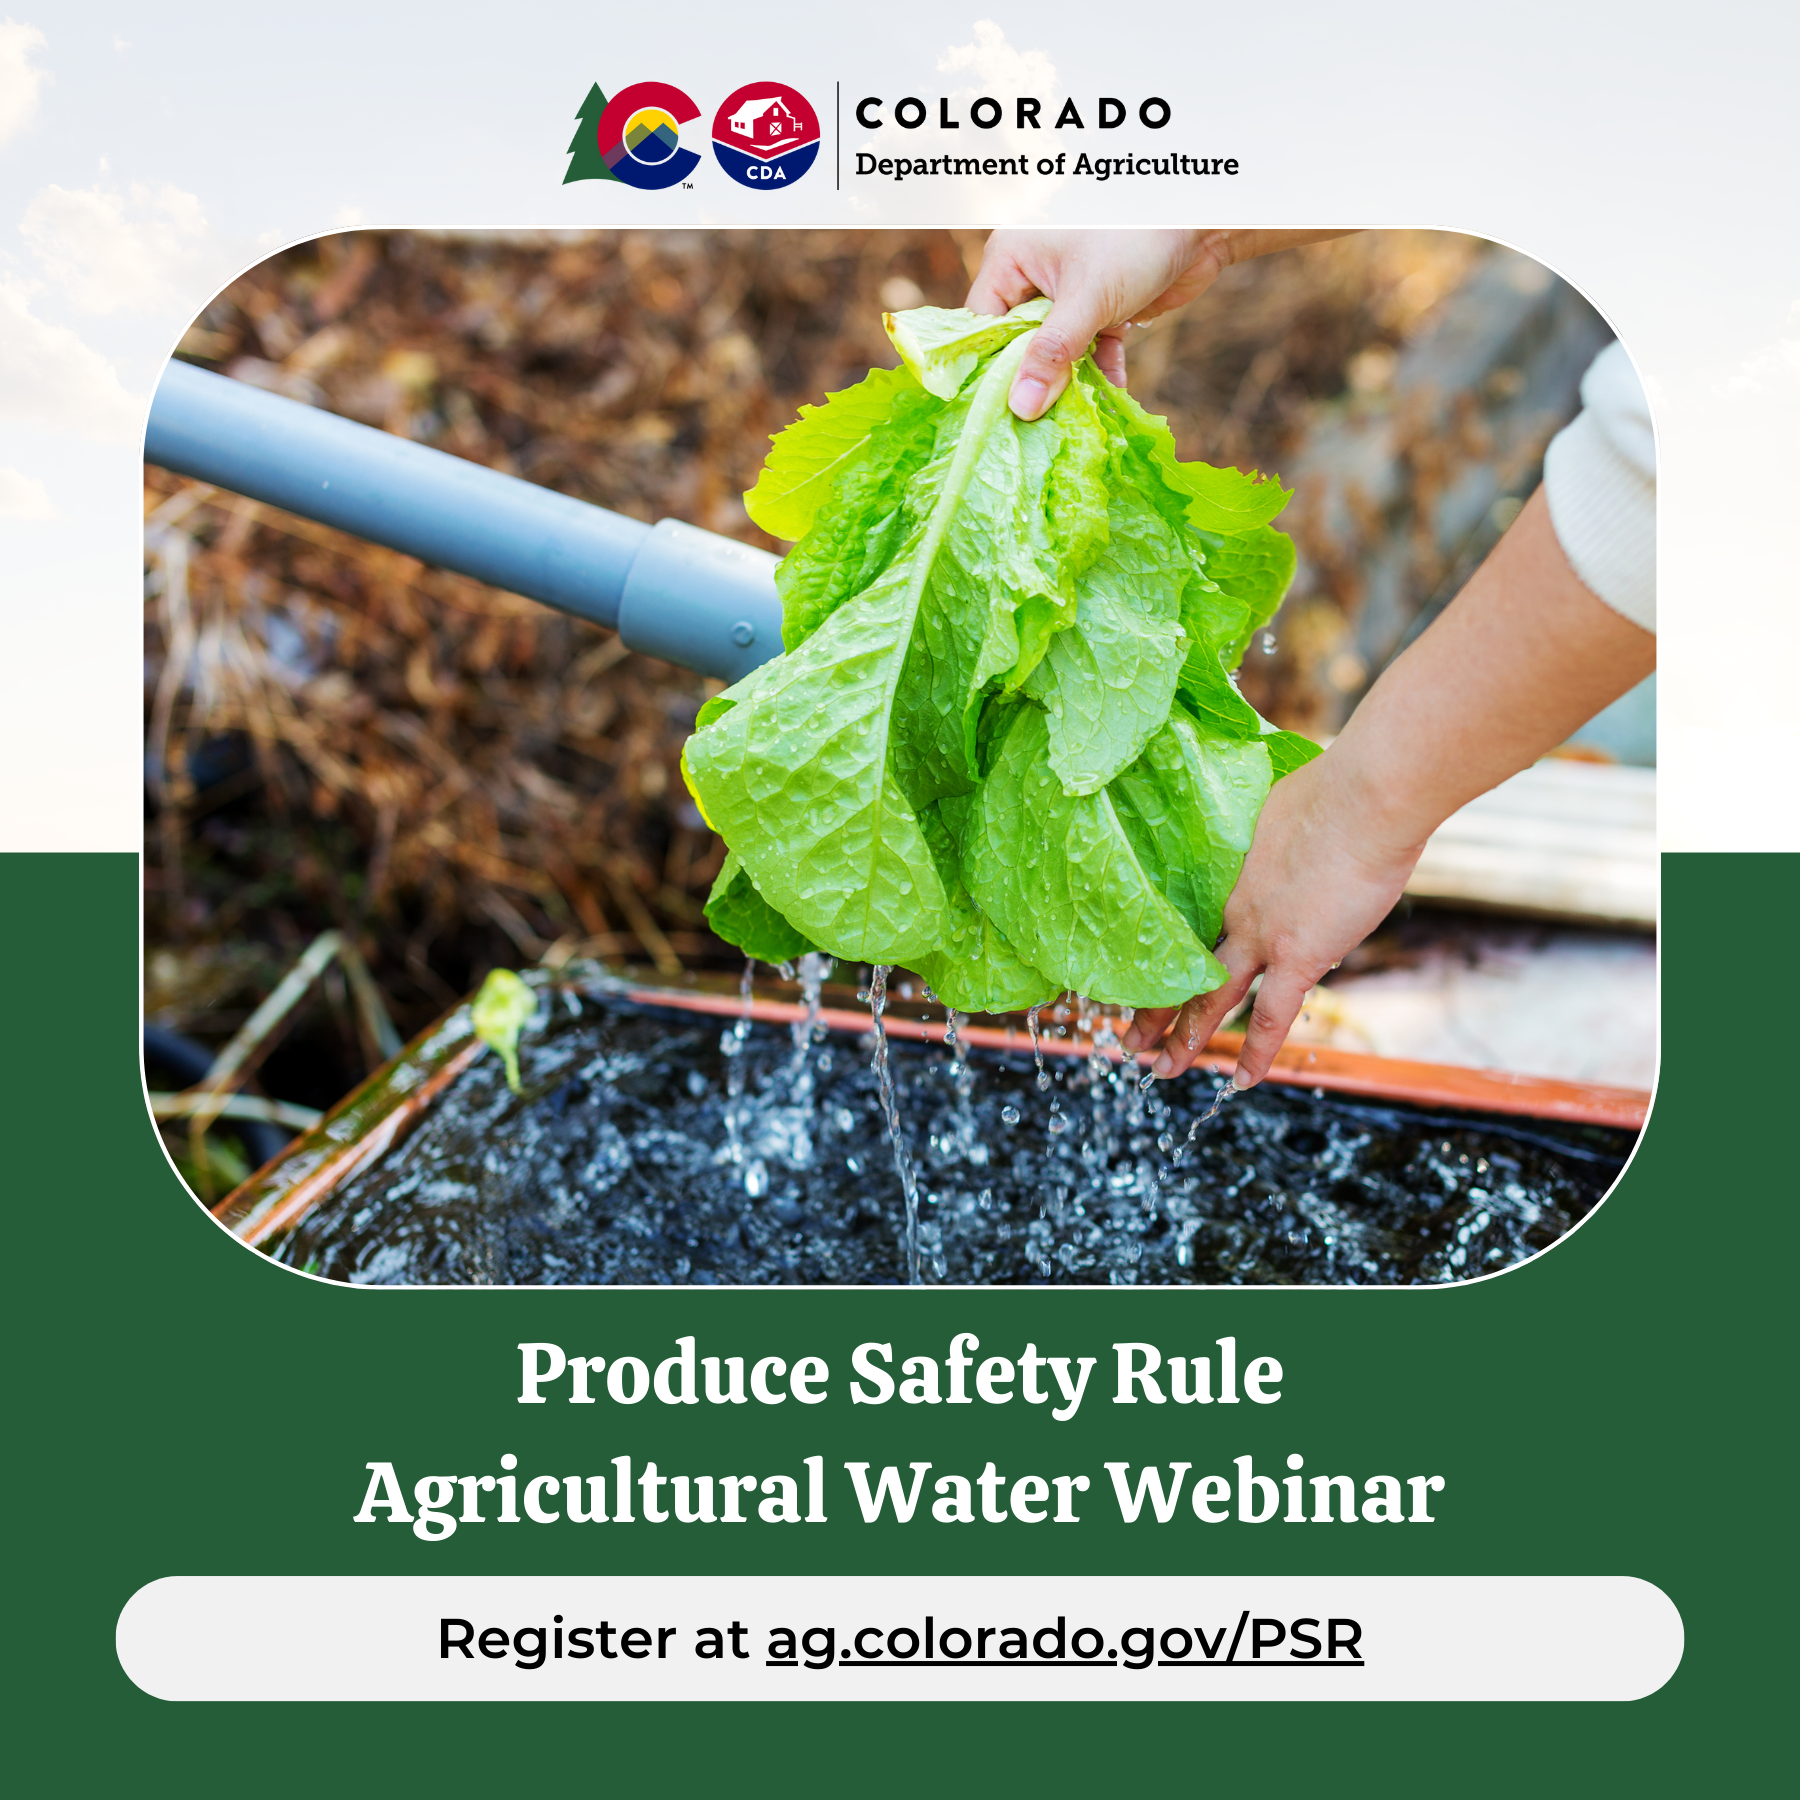 Produce Safety Rule Agricultural Water Webinar offered, March 20.